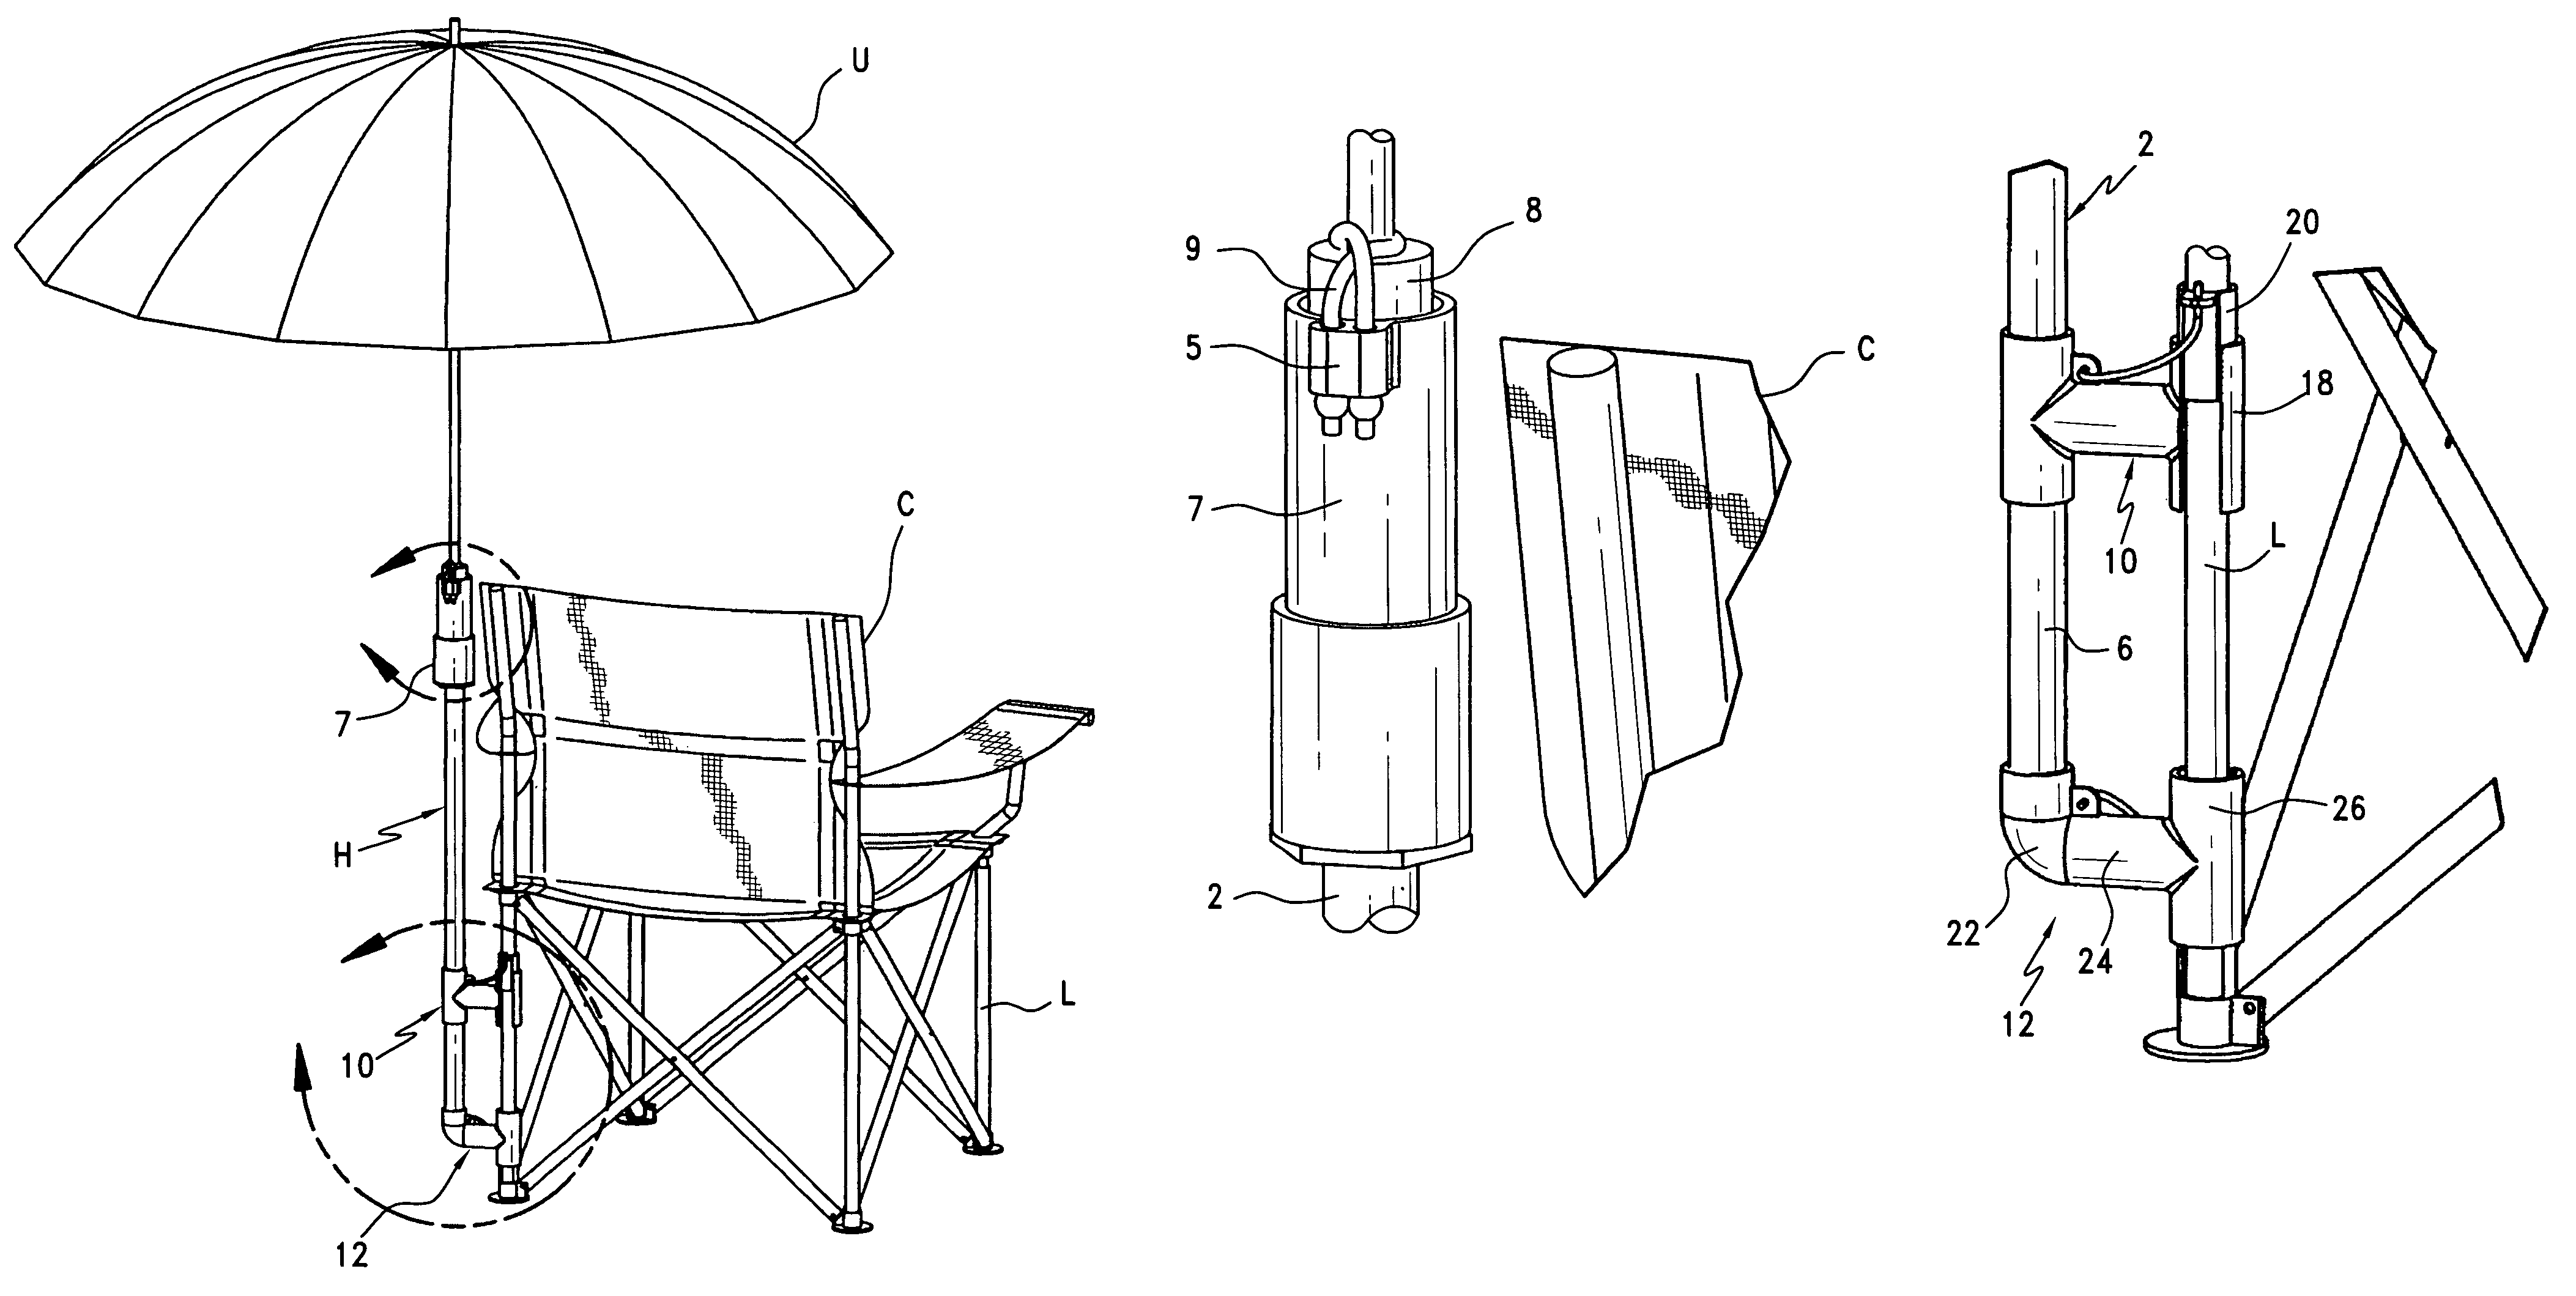 Accessory holder for a chair